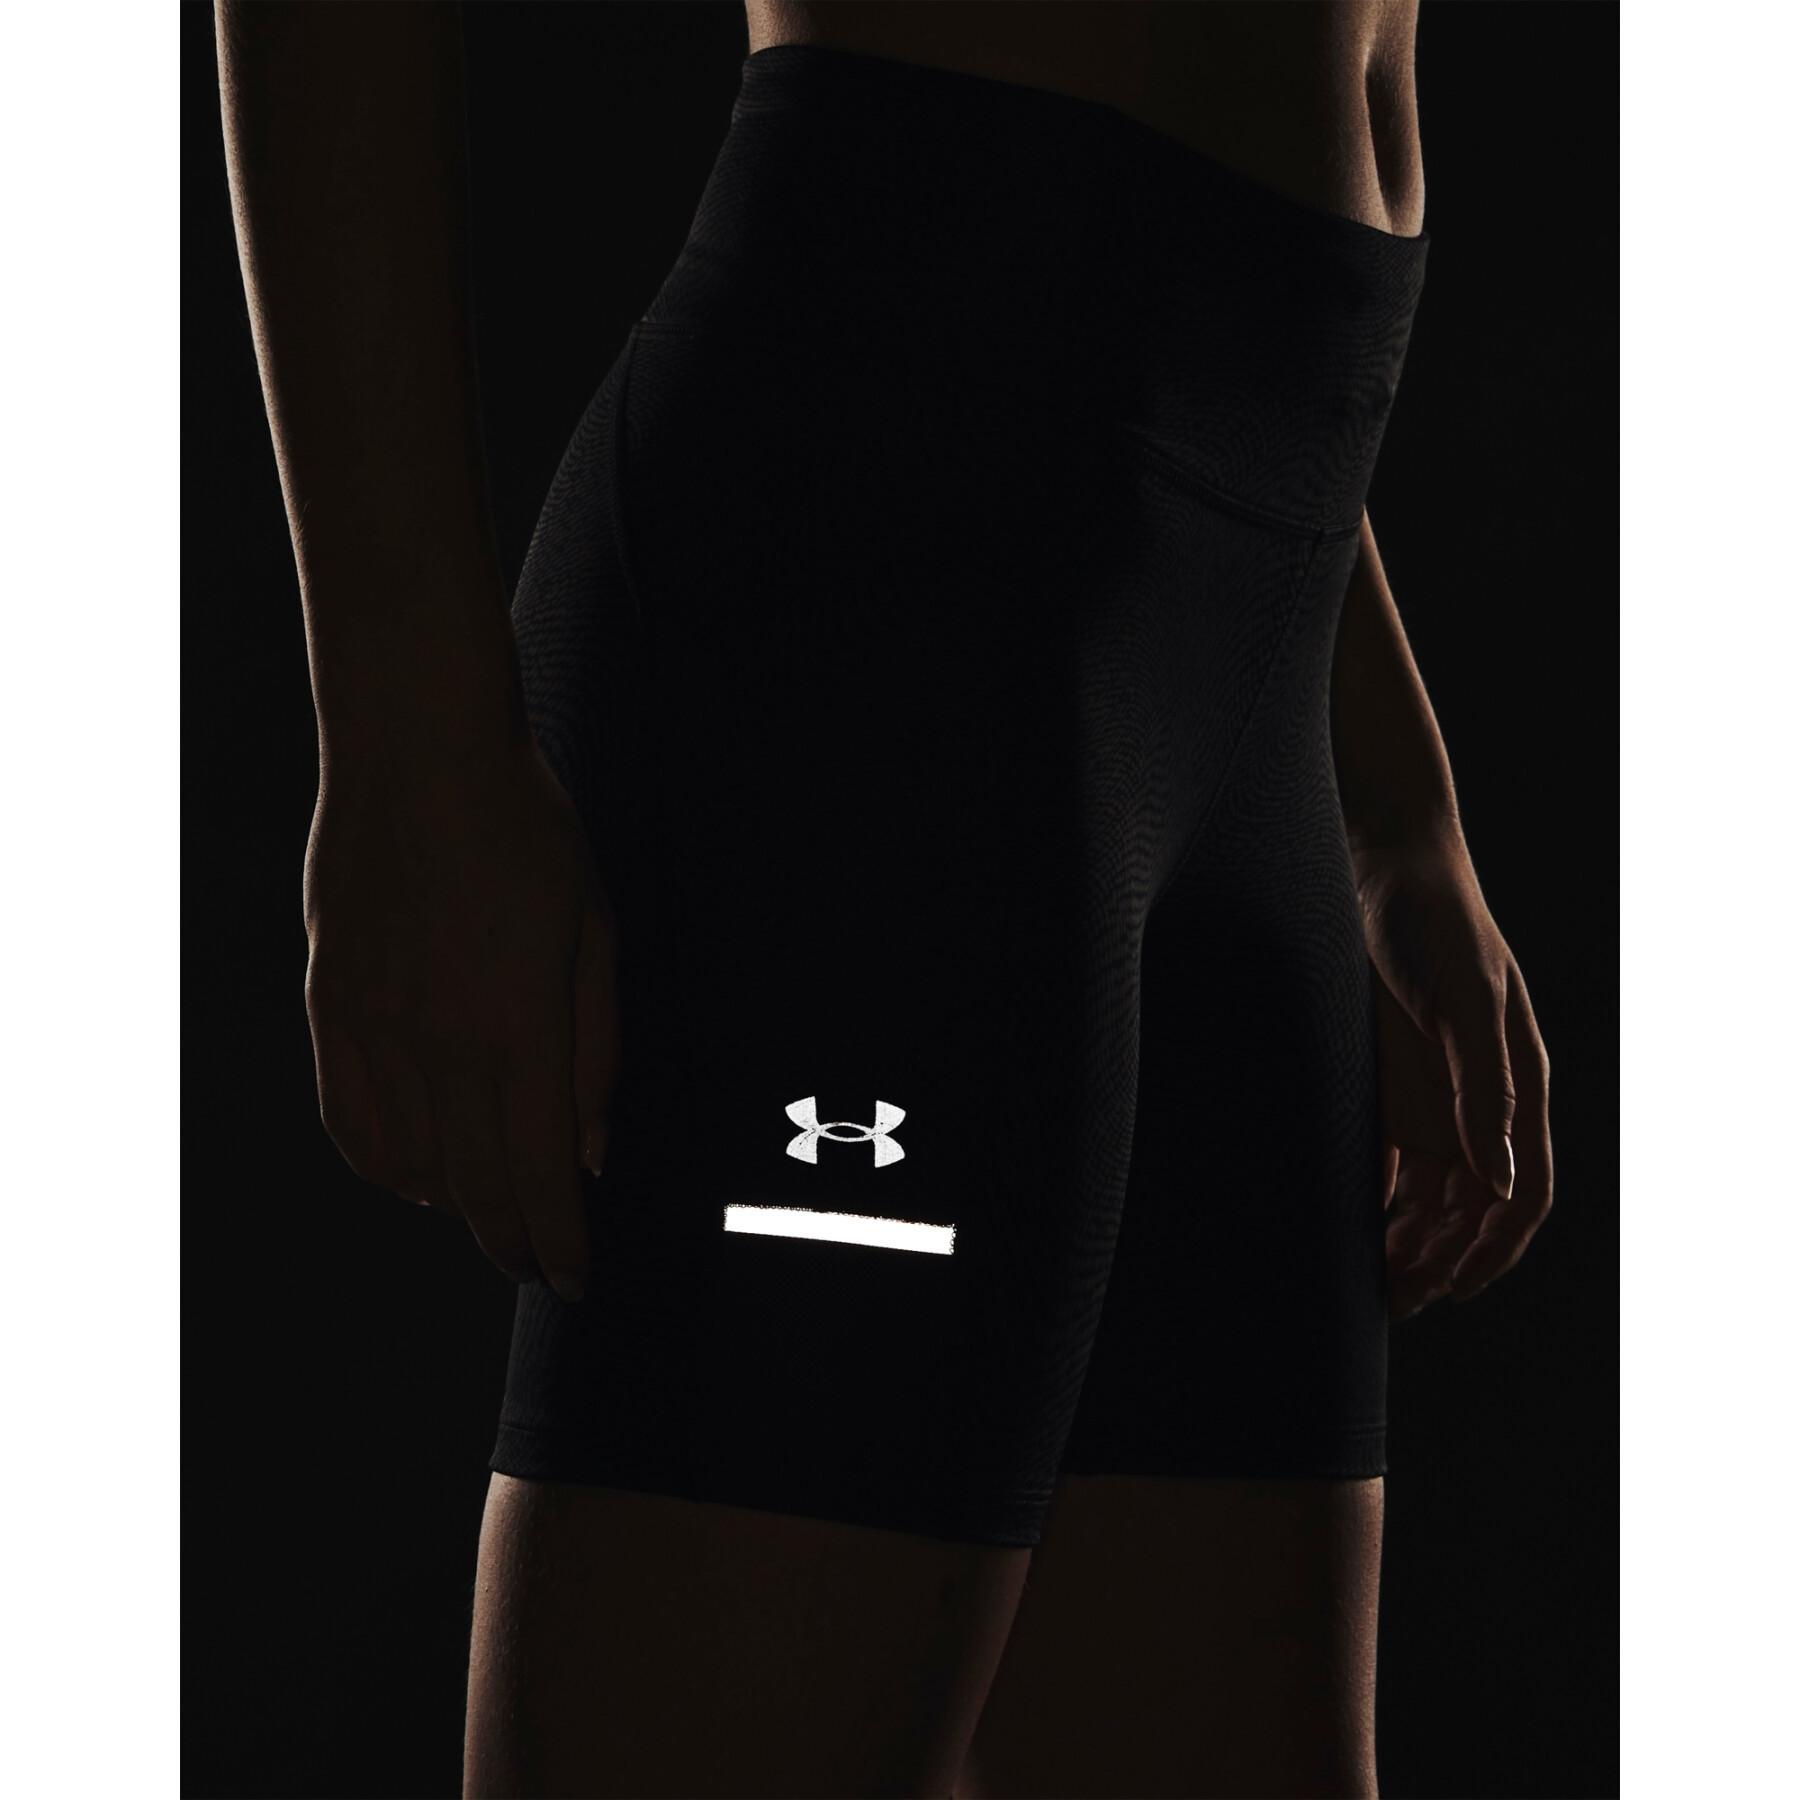 Women's thigh-high boots Under Armour Fly Fast 3.0